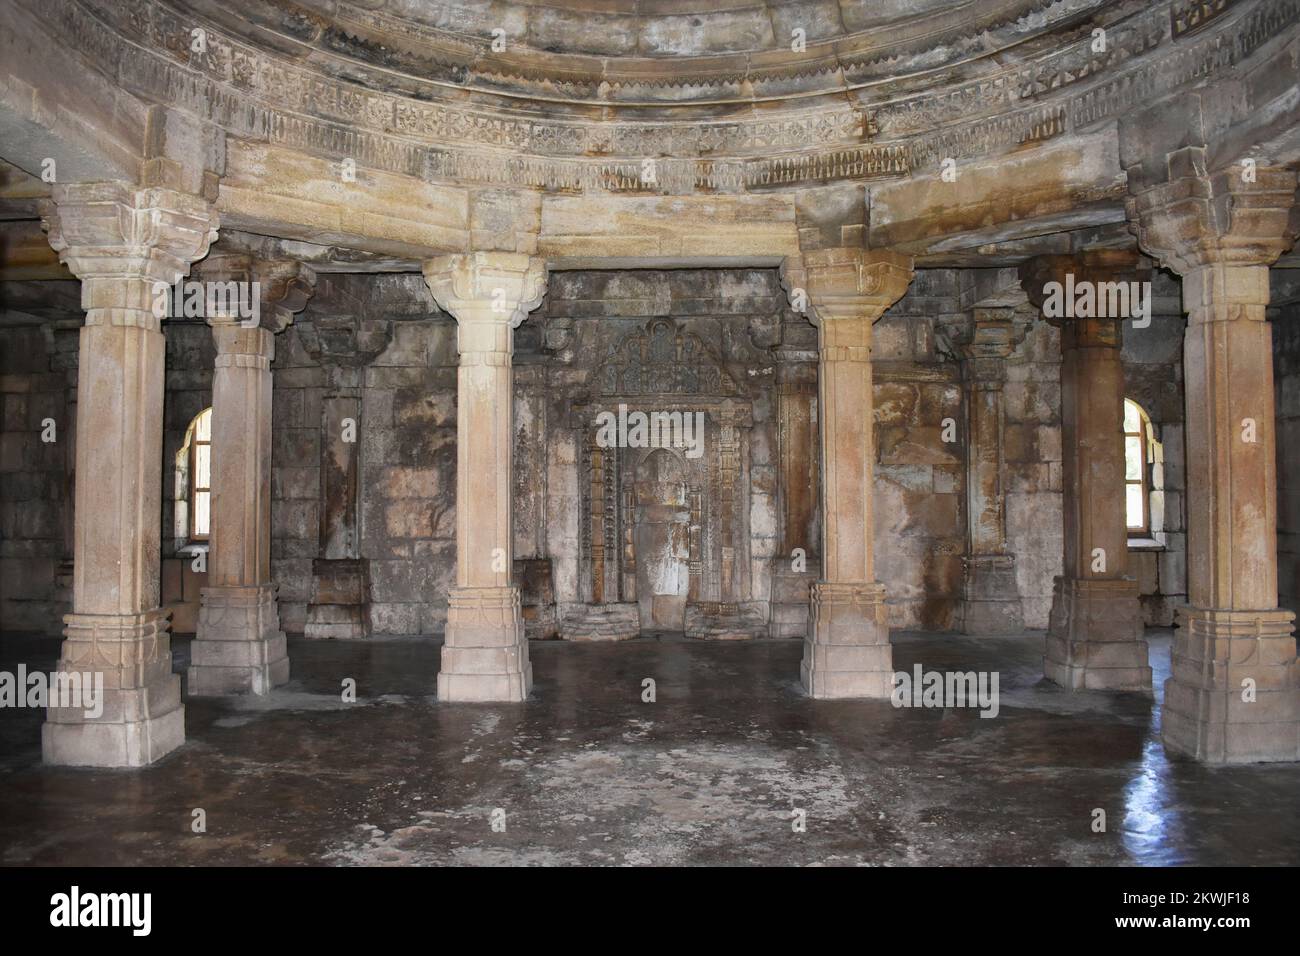 Shaher ki Masjid, stone carvings on Pillars, wall and dome of was built by Sultan Mahmud Begada 15th - 16th century. A UNESCO World Heritage Site, Guj Stock Photo